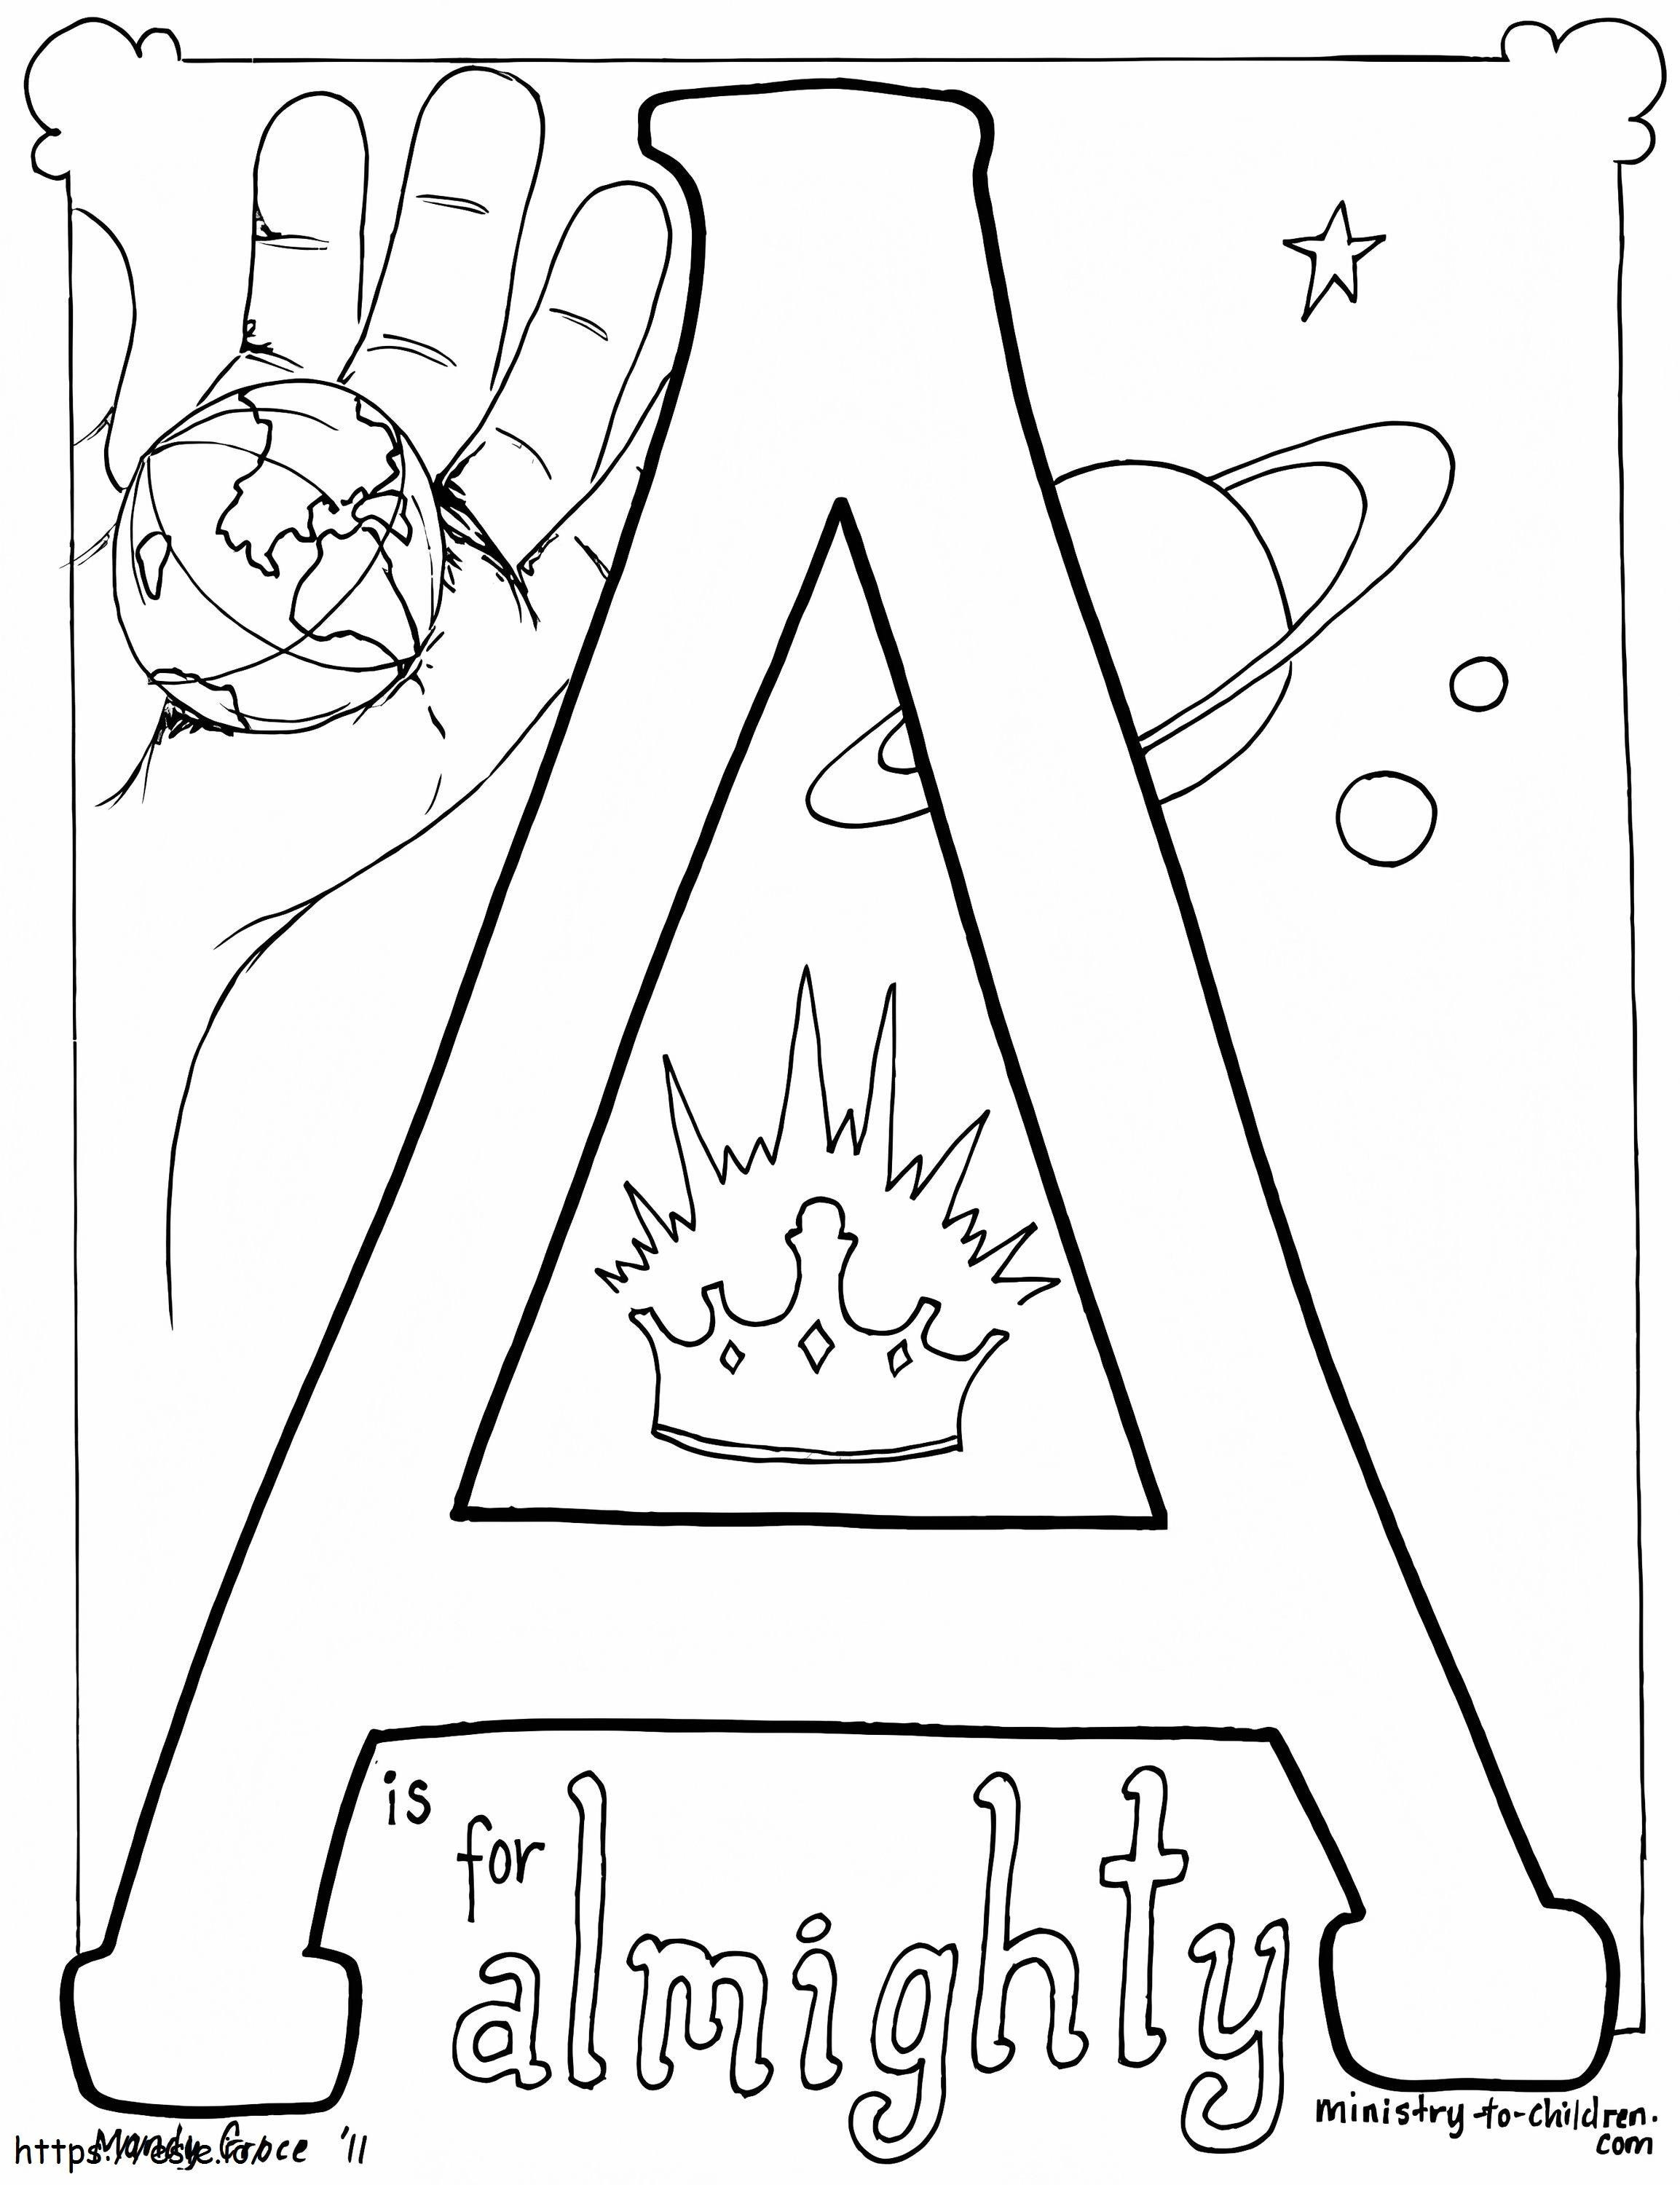 A Is For Almighty coloring page